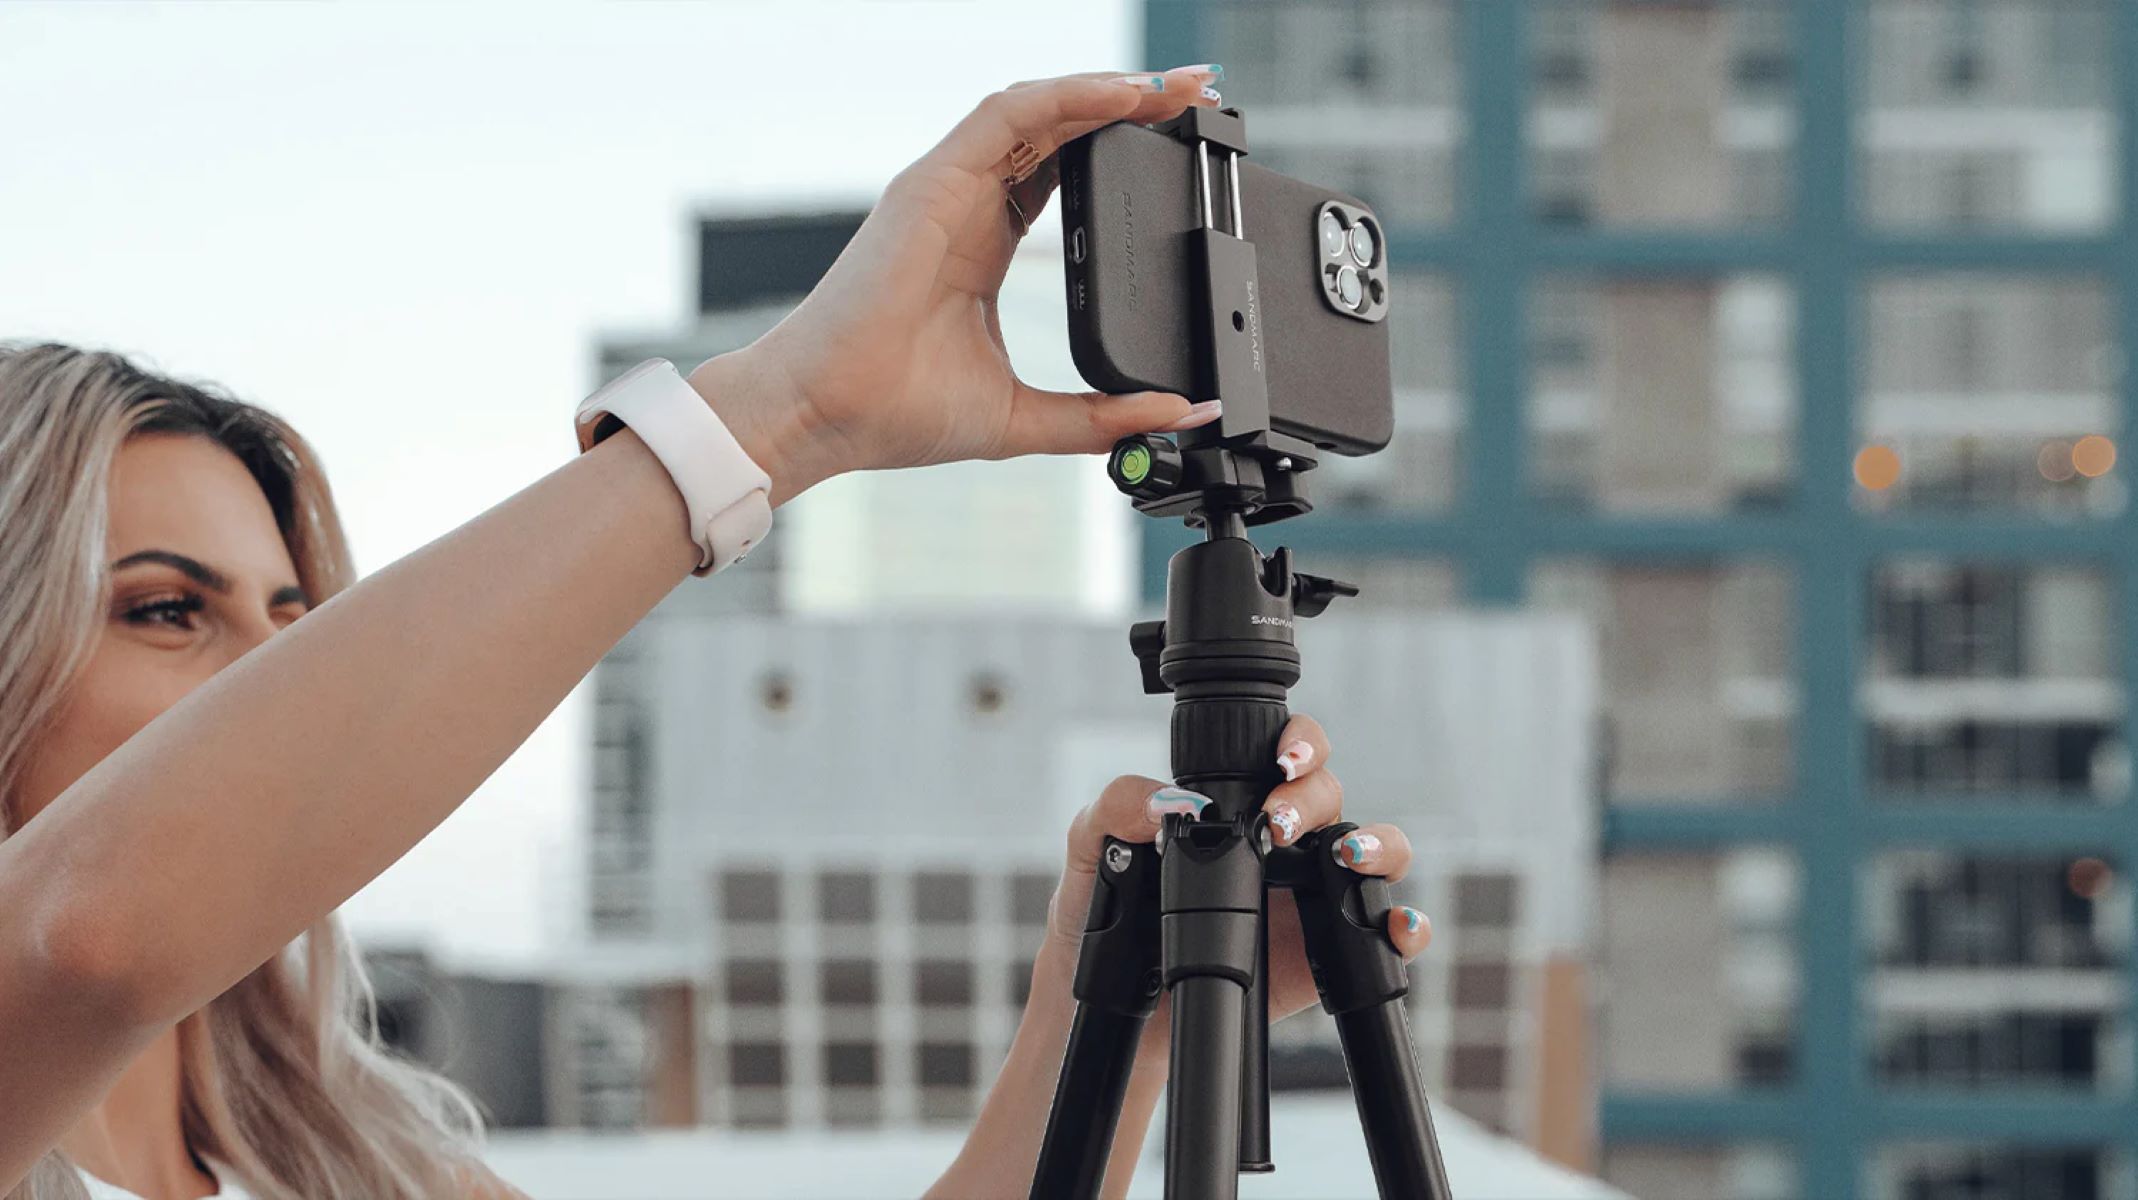 Phone Photography Stability: Using A Tripod For Better Phone Shots